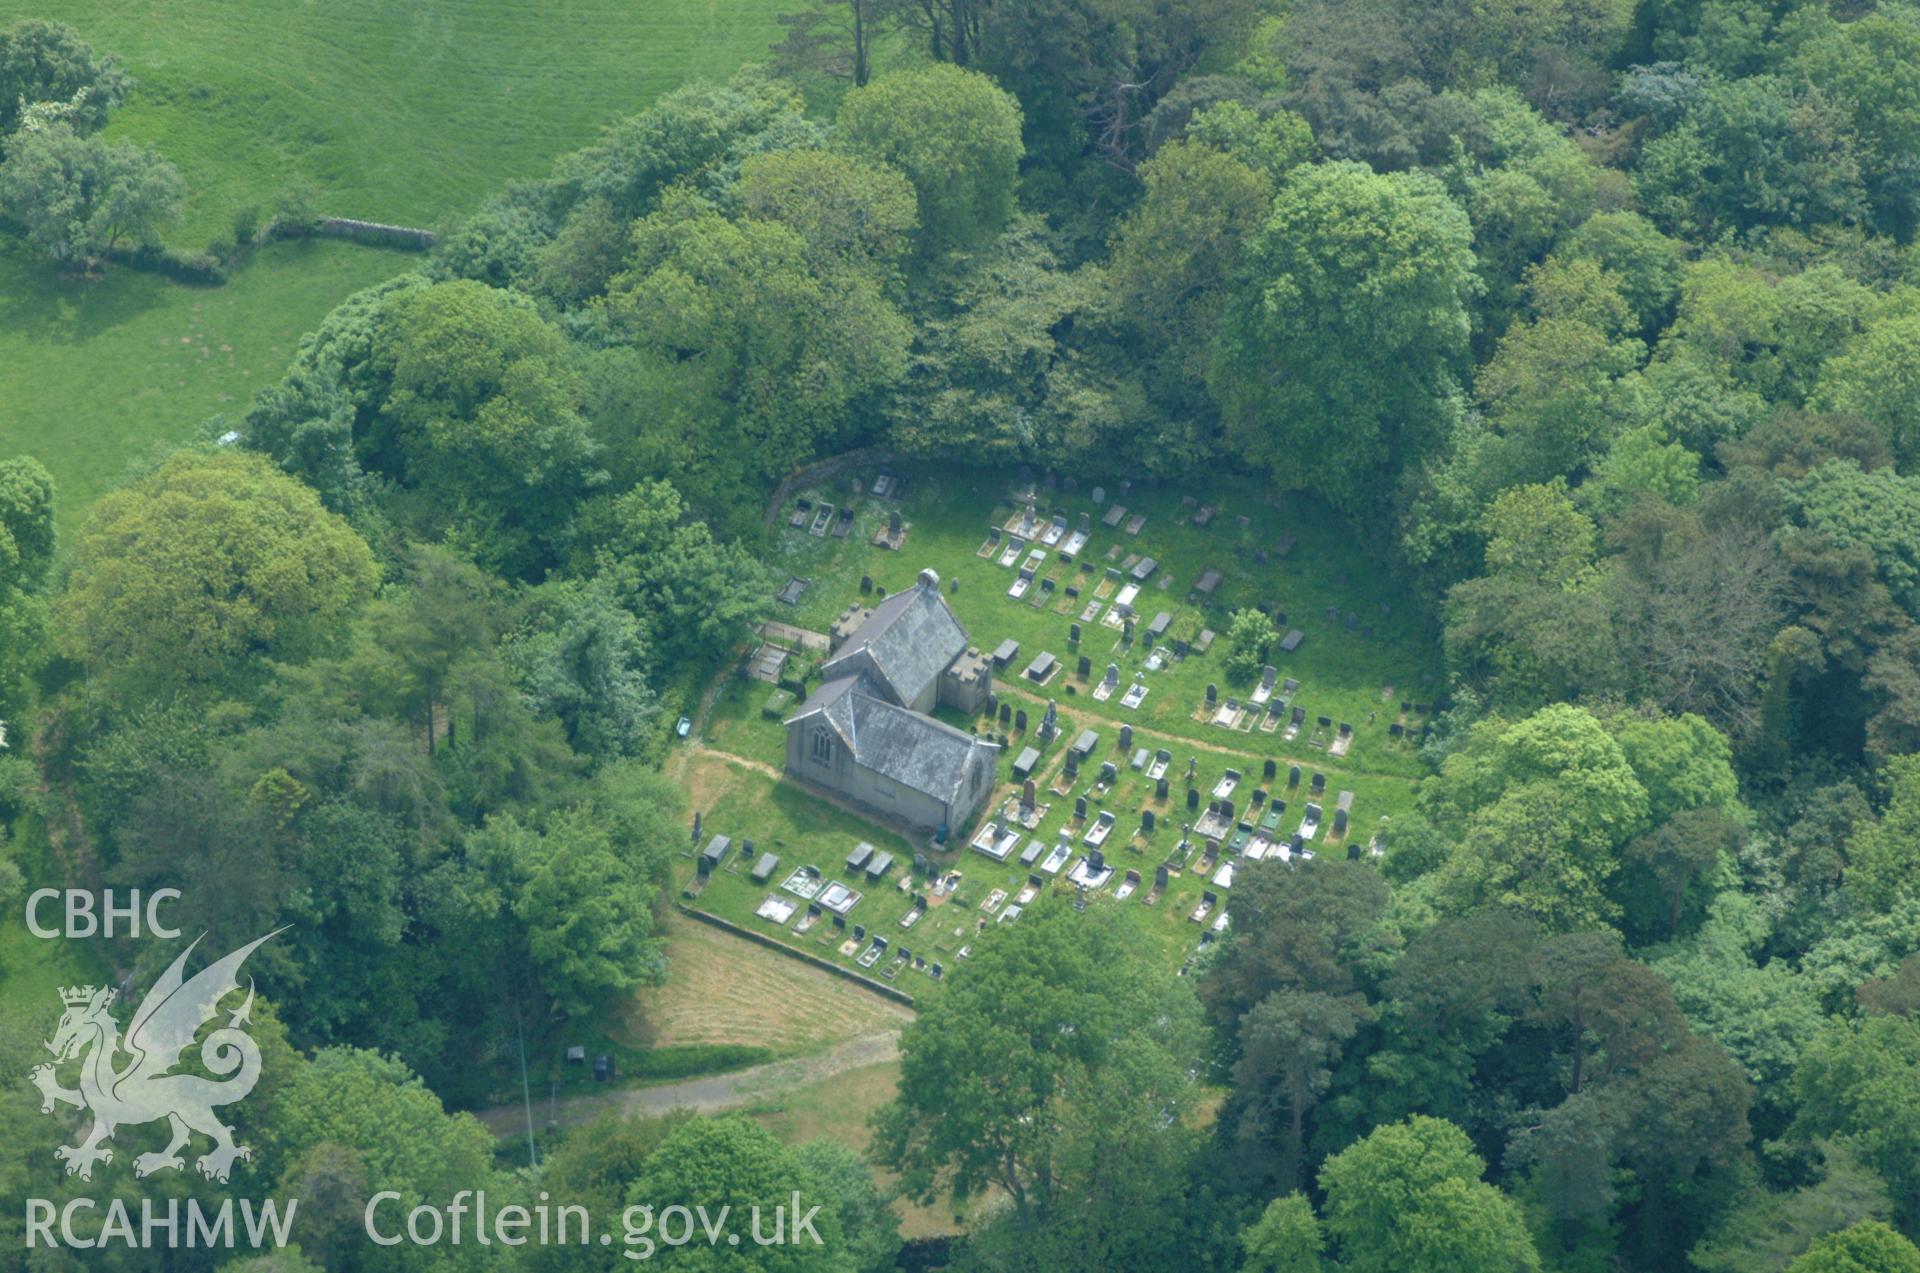 RCAHMW colour oblique aerial photograph of St Eugrads Church taken on 26/05/2004 by Toby Driver